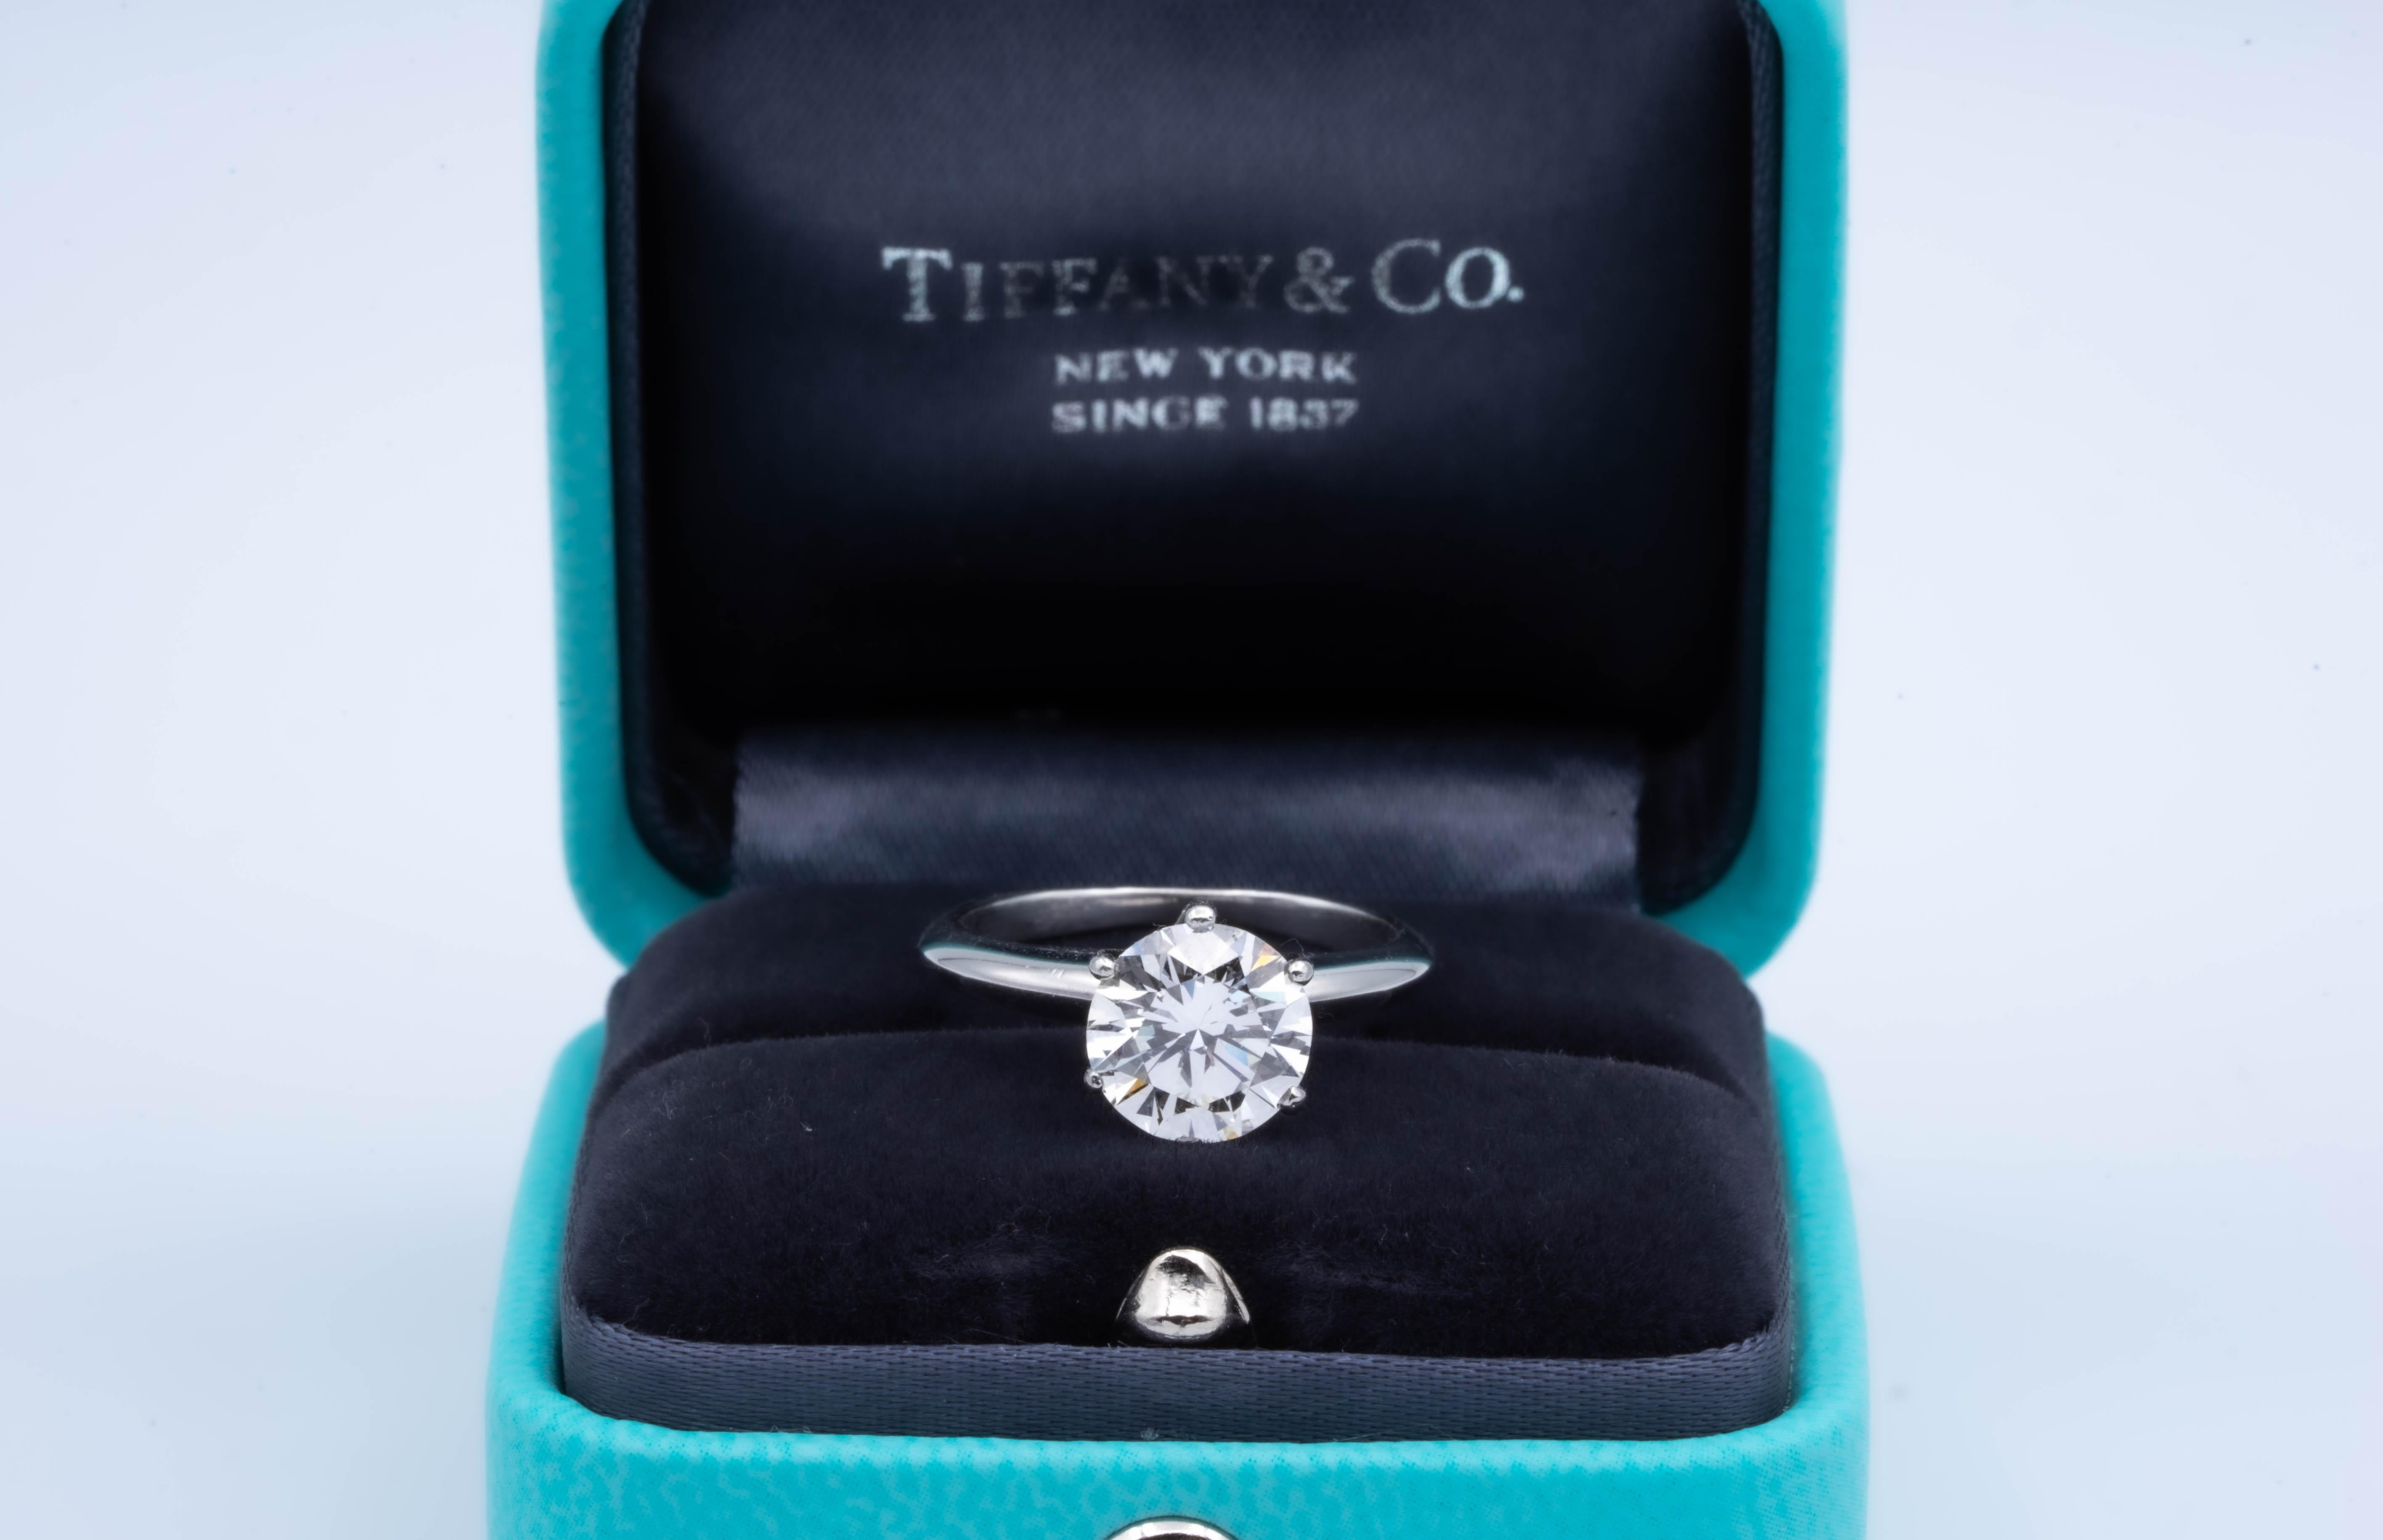 Vintage Tiffany & Co Round Brilliant Solitaire Engagement Ring featuring a 1.64 ct Center I  color, VS2 clarity, finely crafted in a 6 prong Platinum Mounting. This diamond Includes a GIA certificate with report number 10091237 and a grading of I